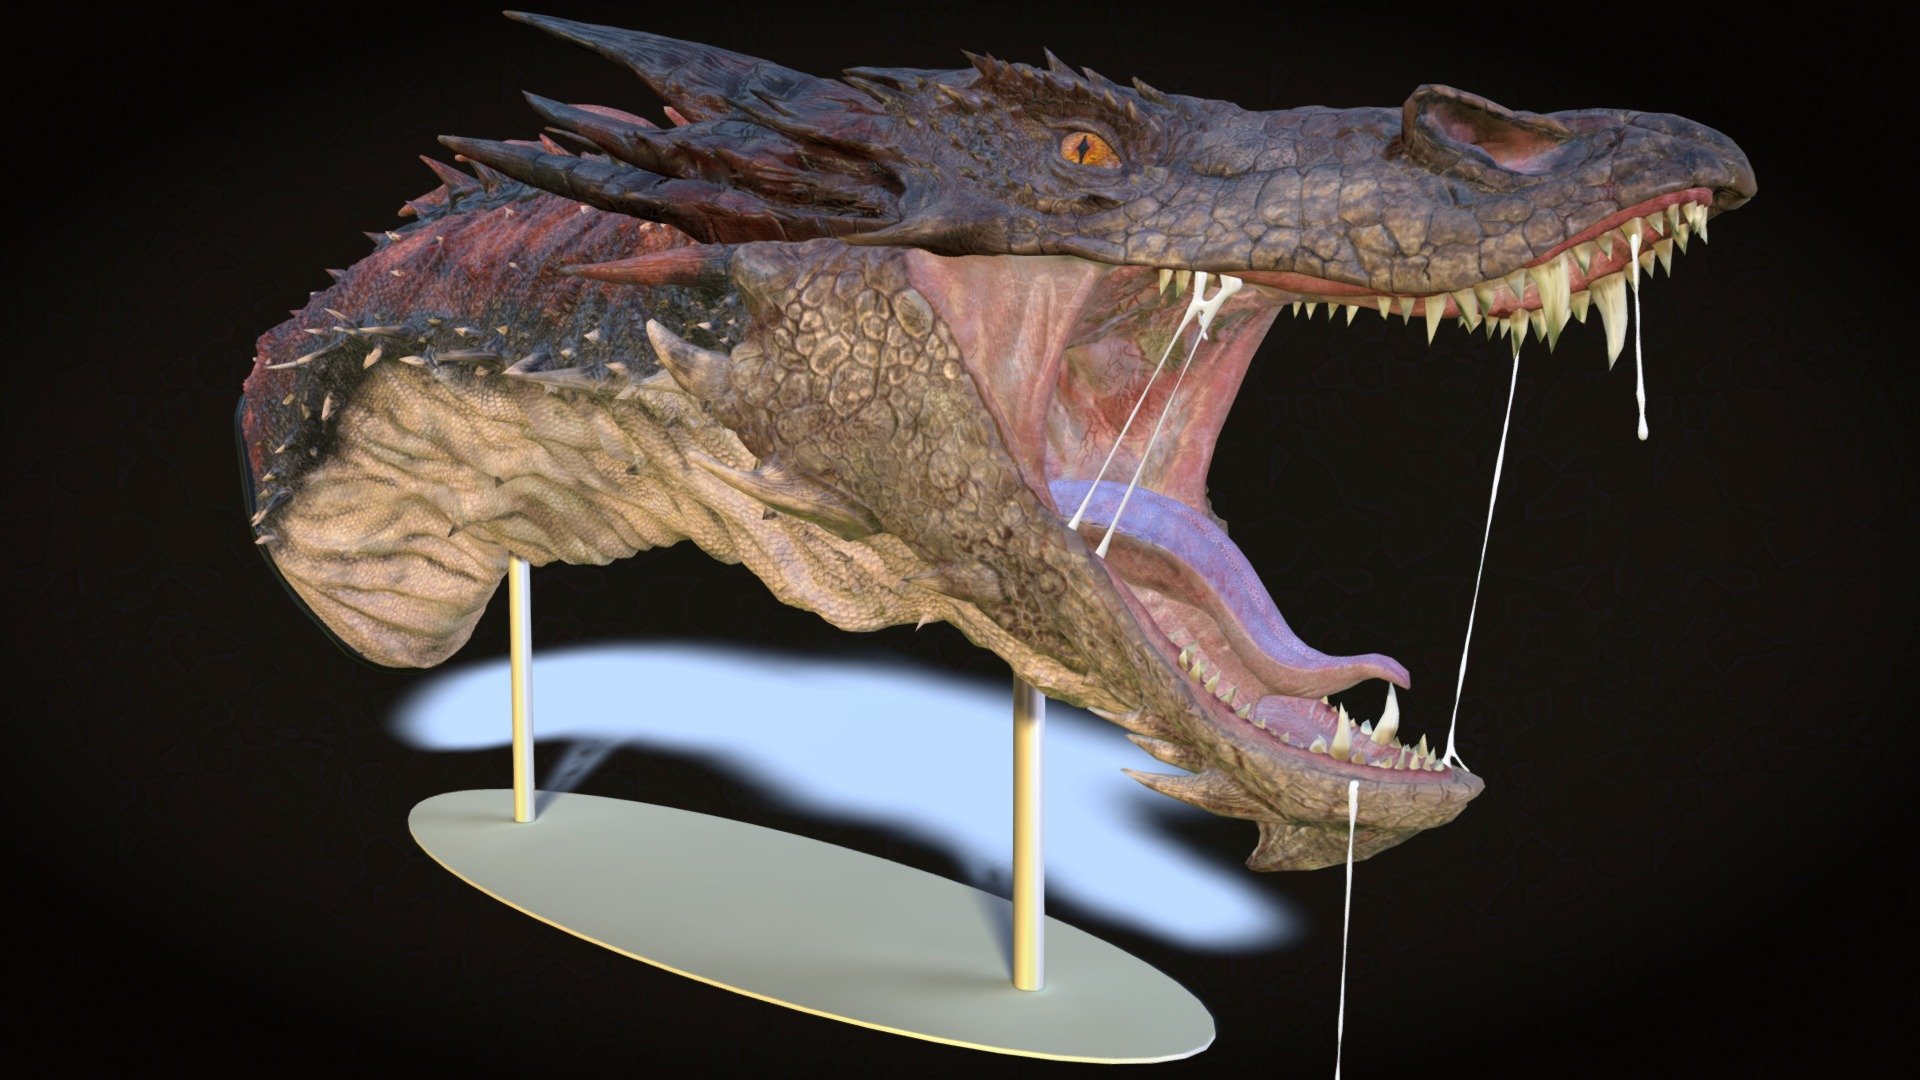 Fan-art model of Smaug the Magnificent!
Sculpted in Zbrush, baked in Xnormal, lighting and arranging in Modo. Tessellated topology.
Has all the internals (throat, trachea, nasal cavity) 3d model